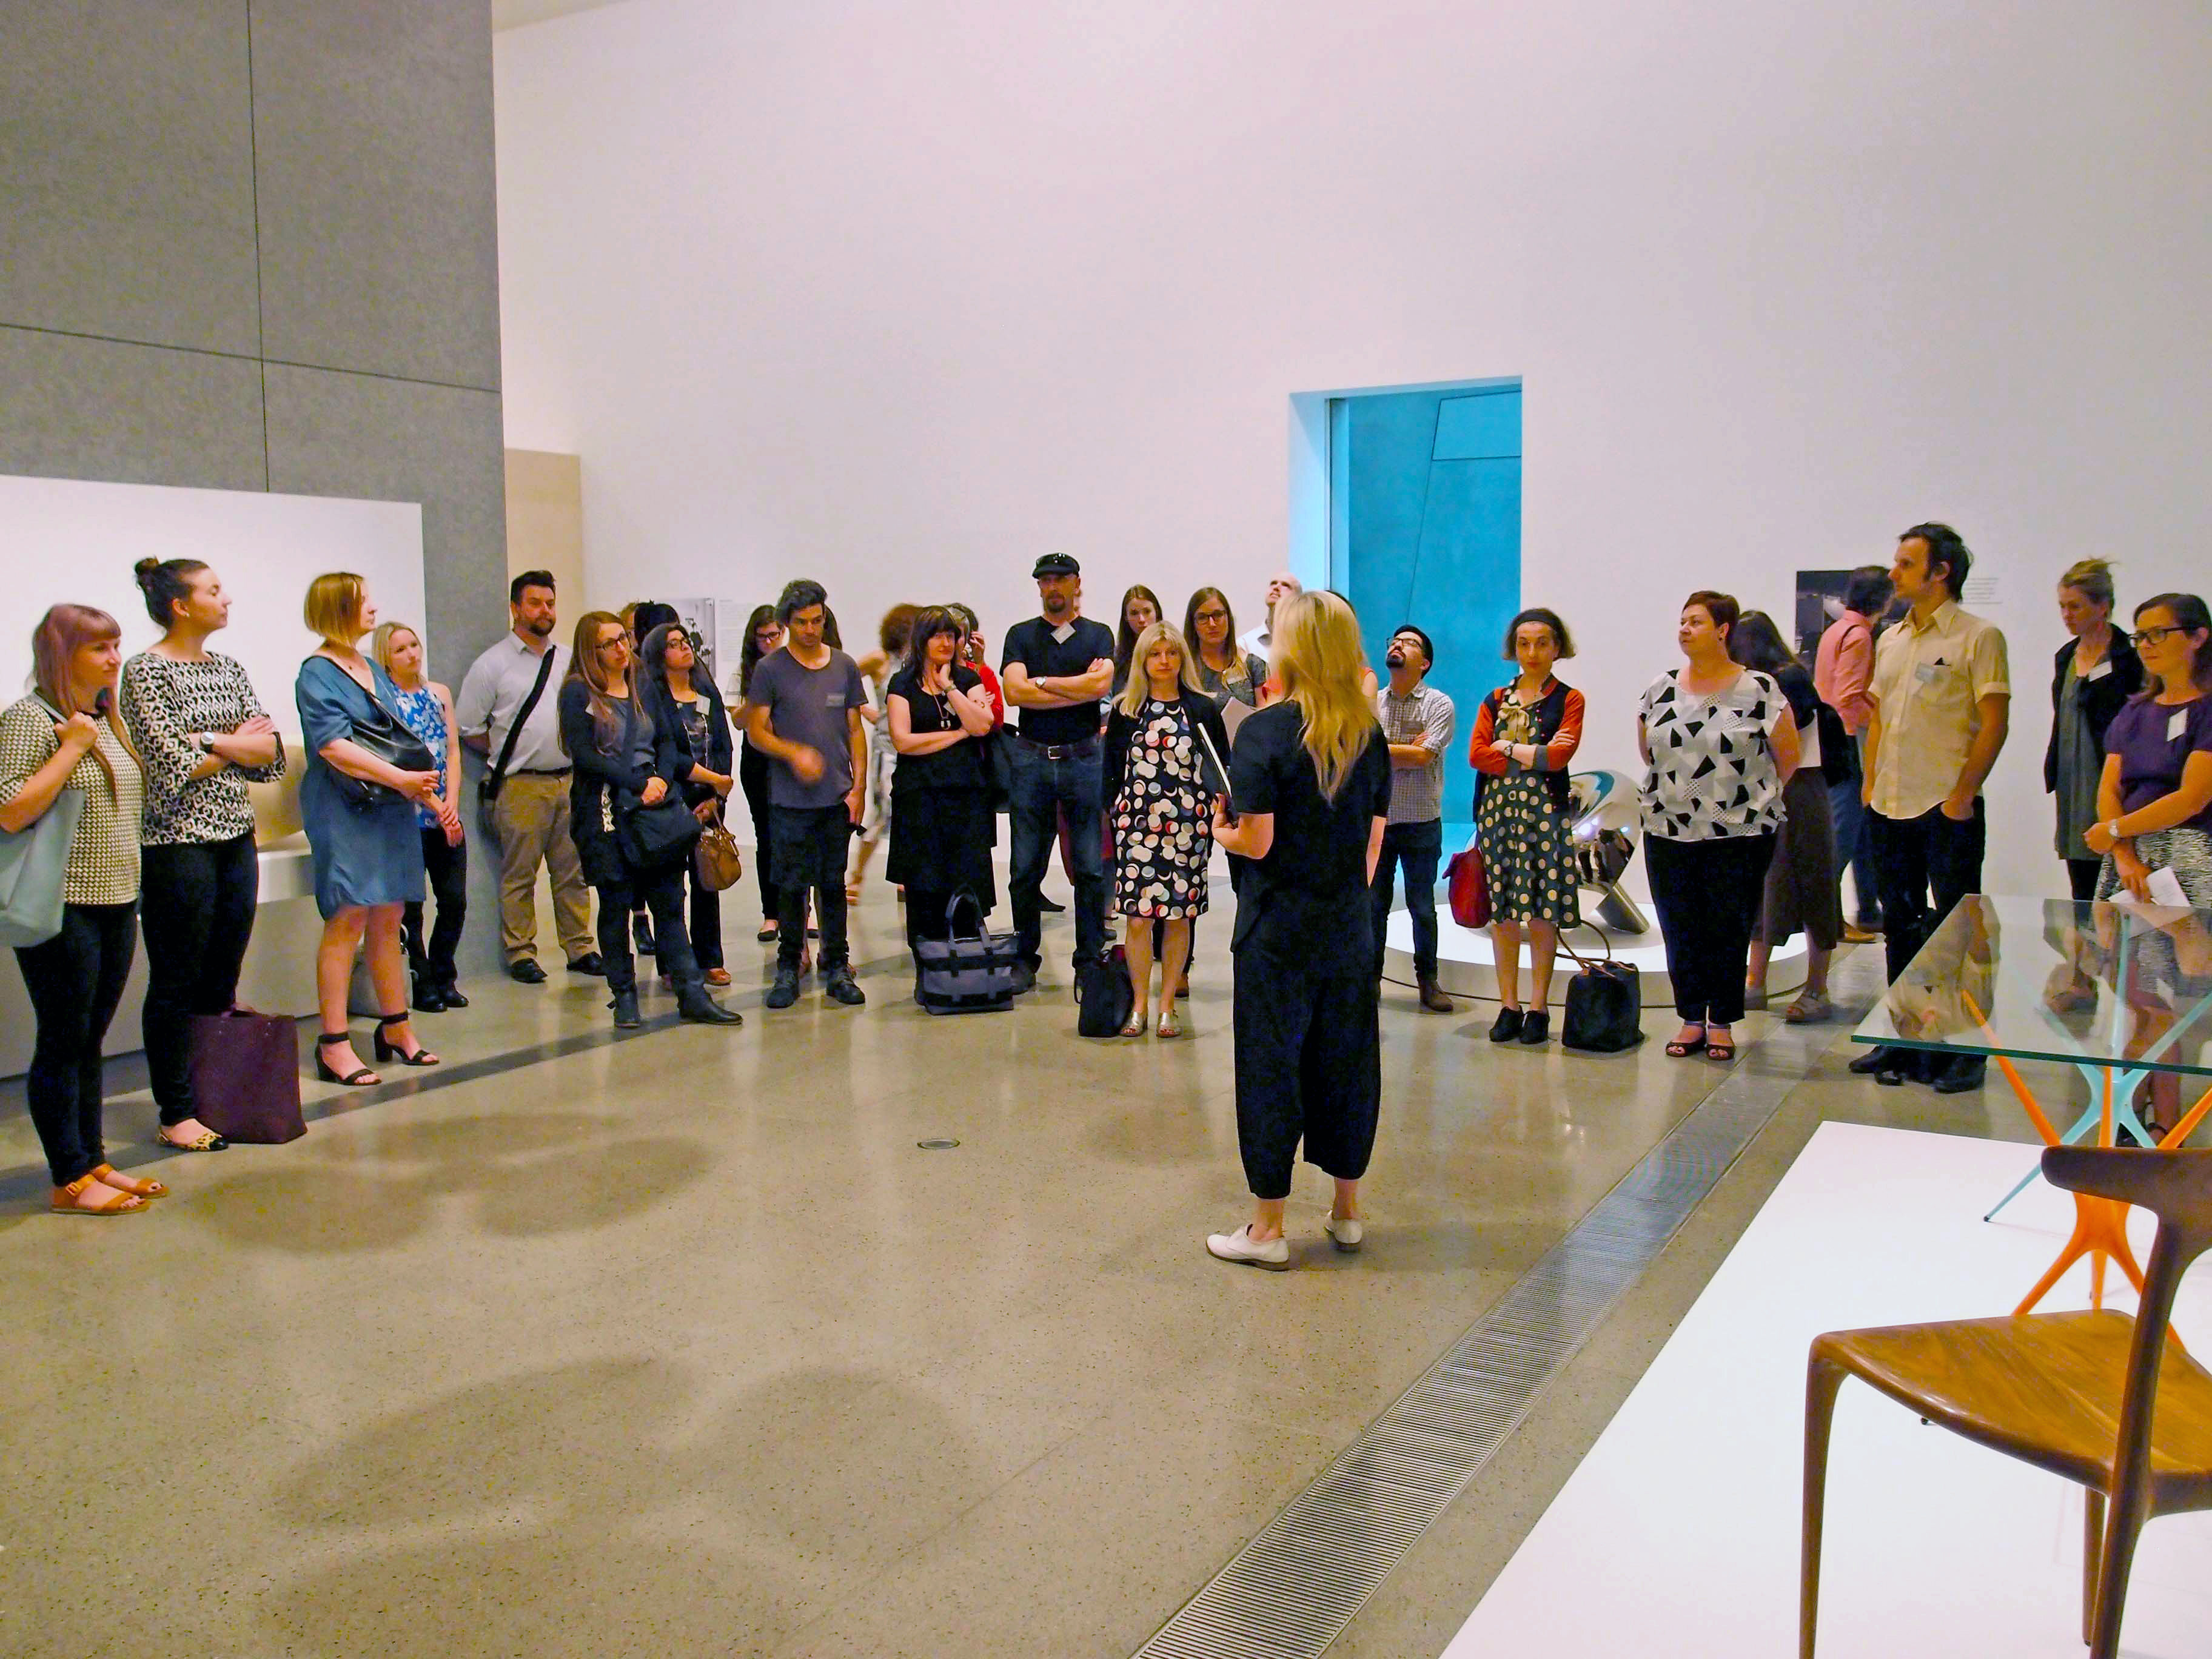  Tour of the Rigg Design Prize at the National Gallery of Victoria as part of the PGAV Curatorial Intensive 2015. 